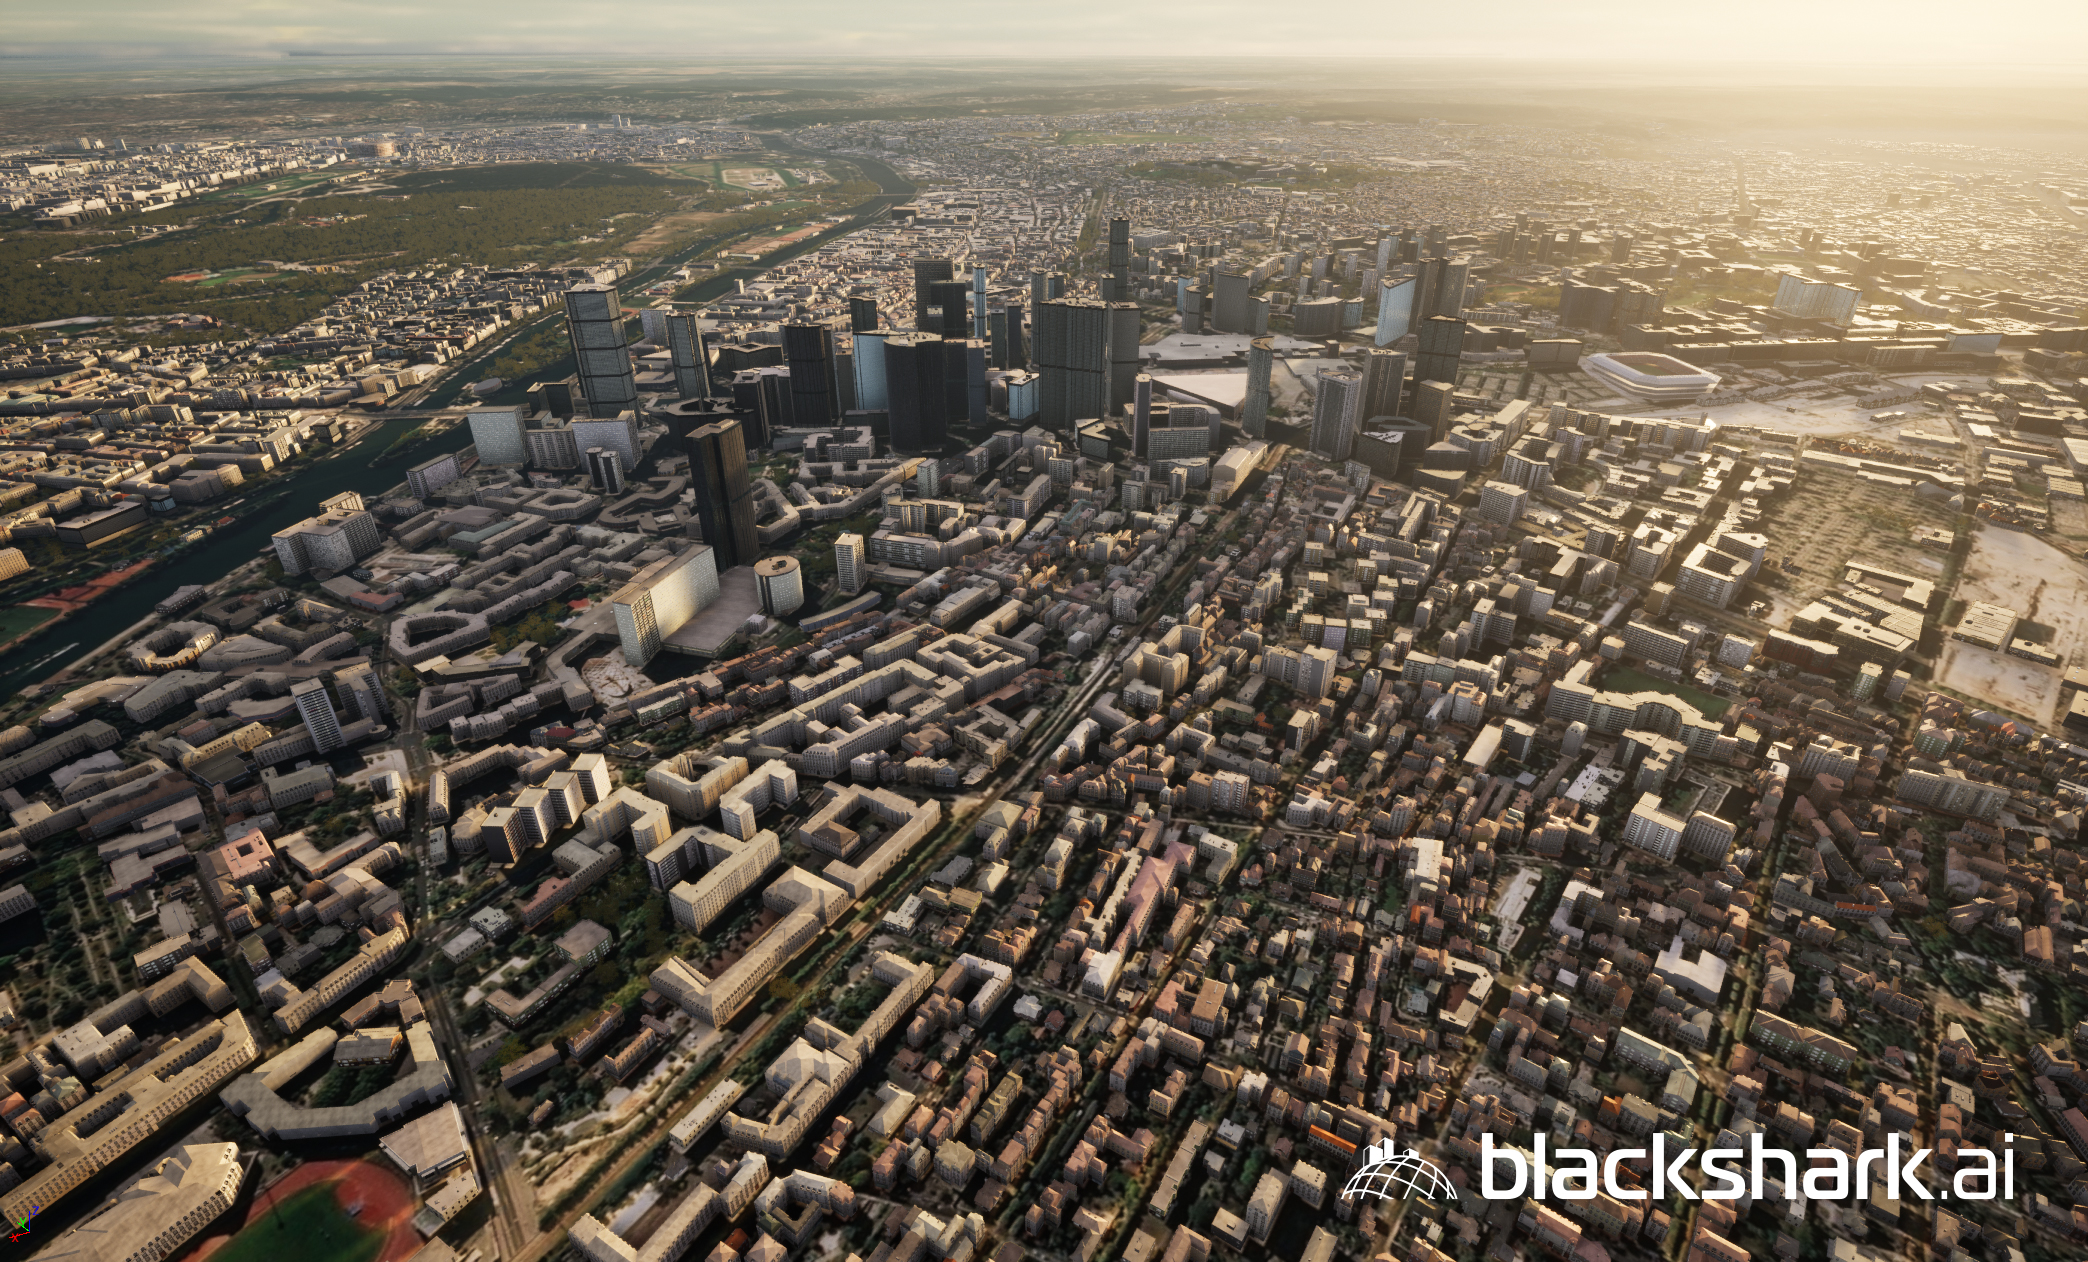 blackshark.ai launches ‘Globe Plugin’ for Unreal Engine, making the whole world available in 3D to anyone